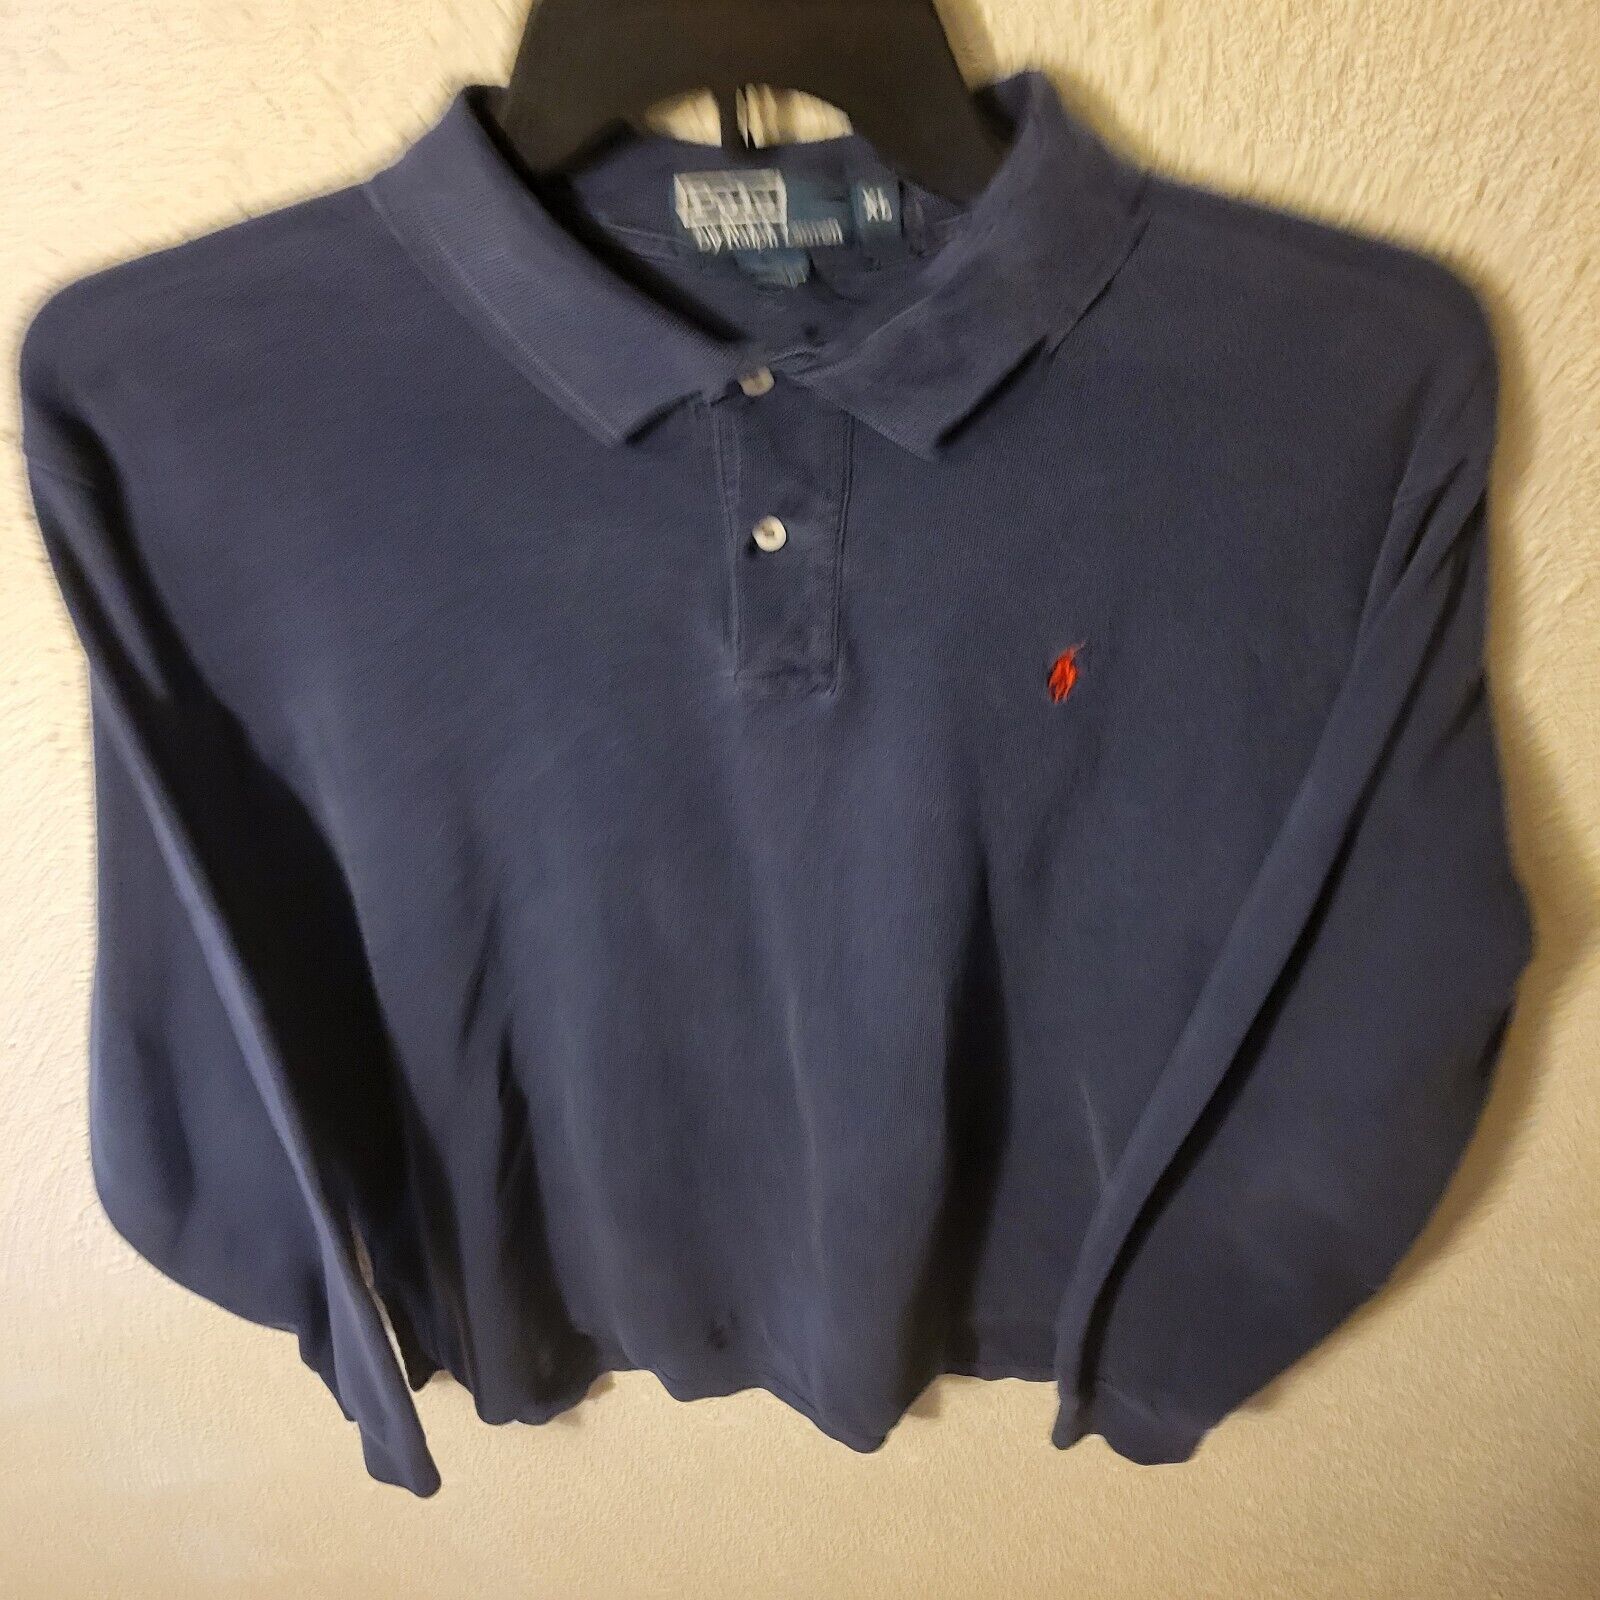 vintage 90s 2000s polo ralph lauren long sleeve rugby shirt Blue Red pony XL - $38.60